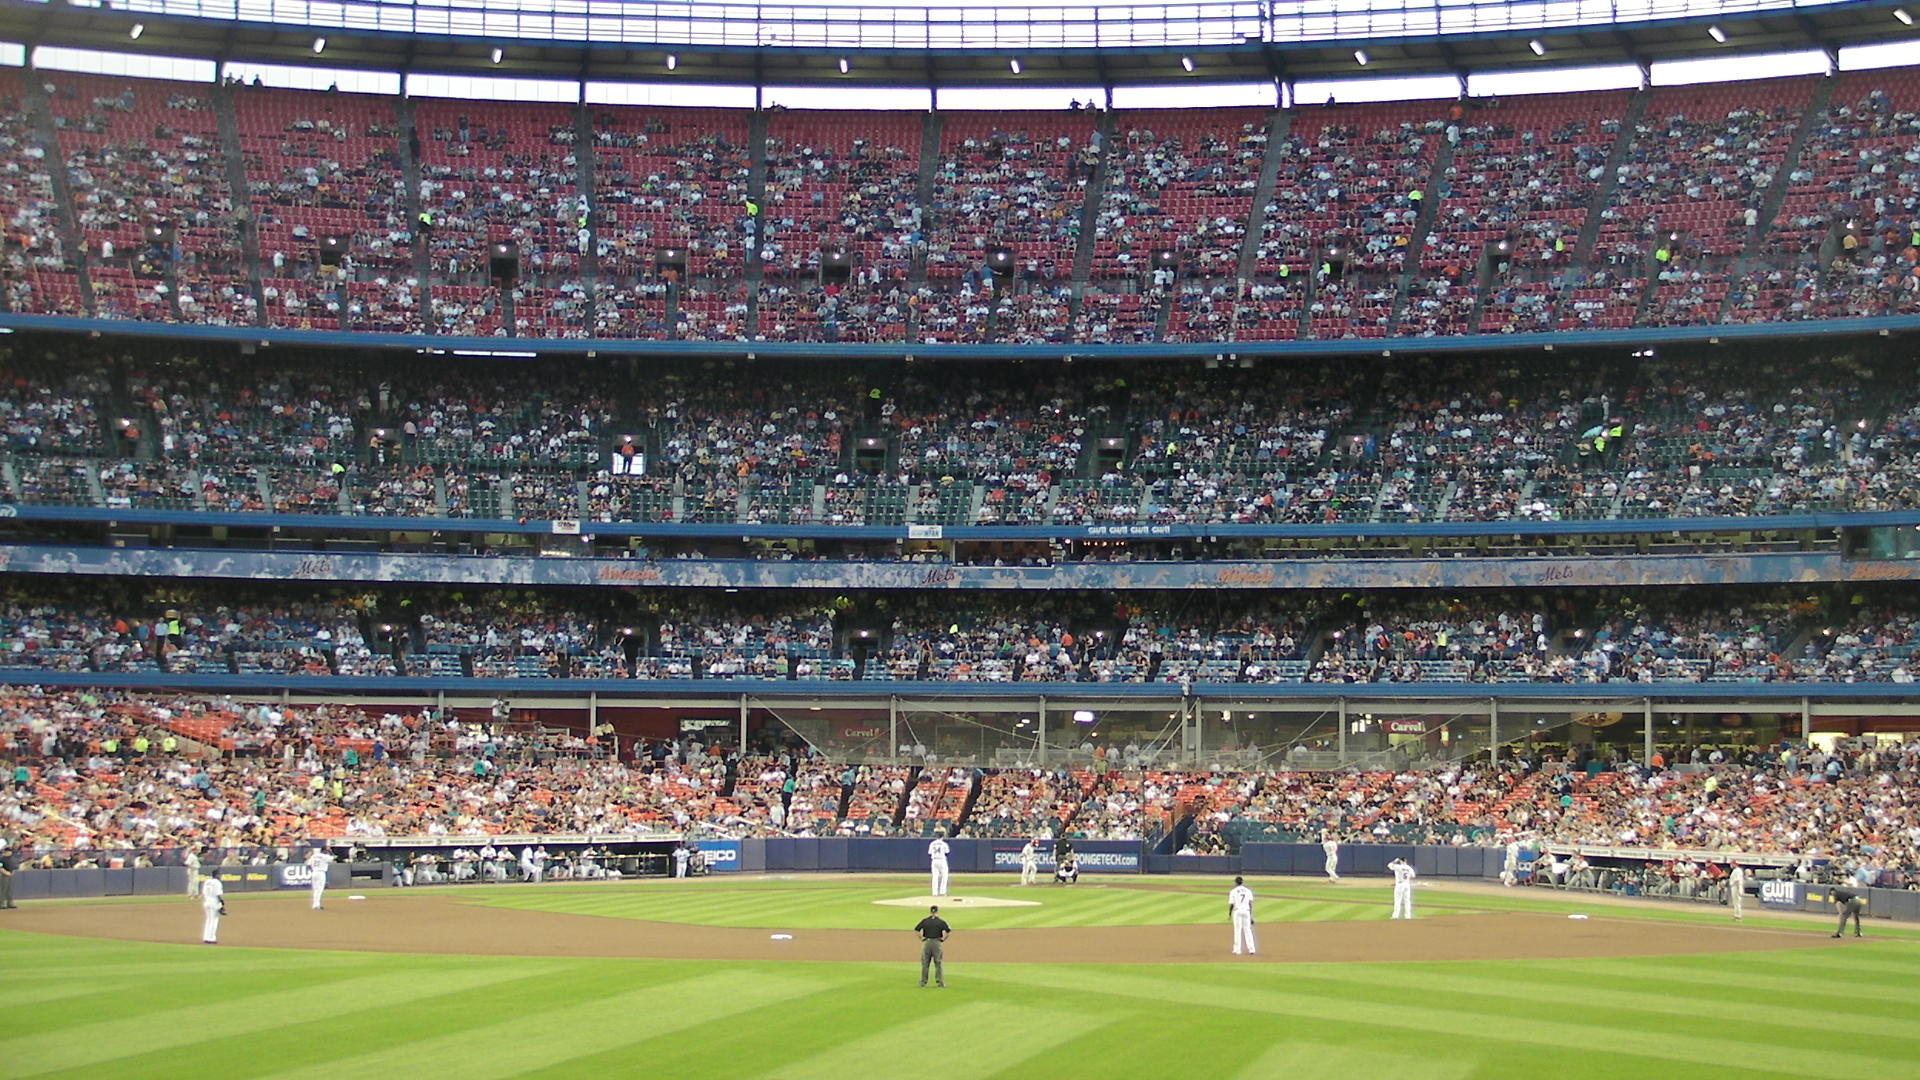 a crowd is watching a baseball game in progress